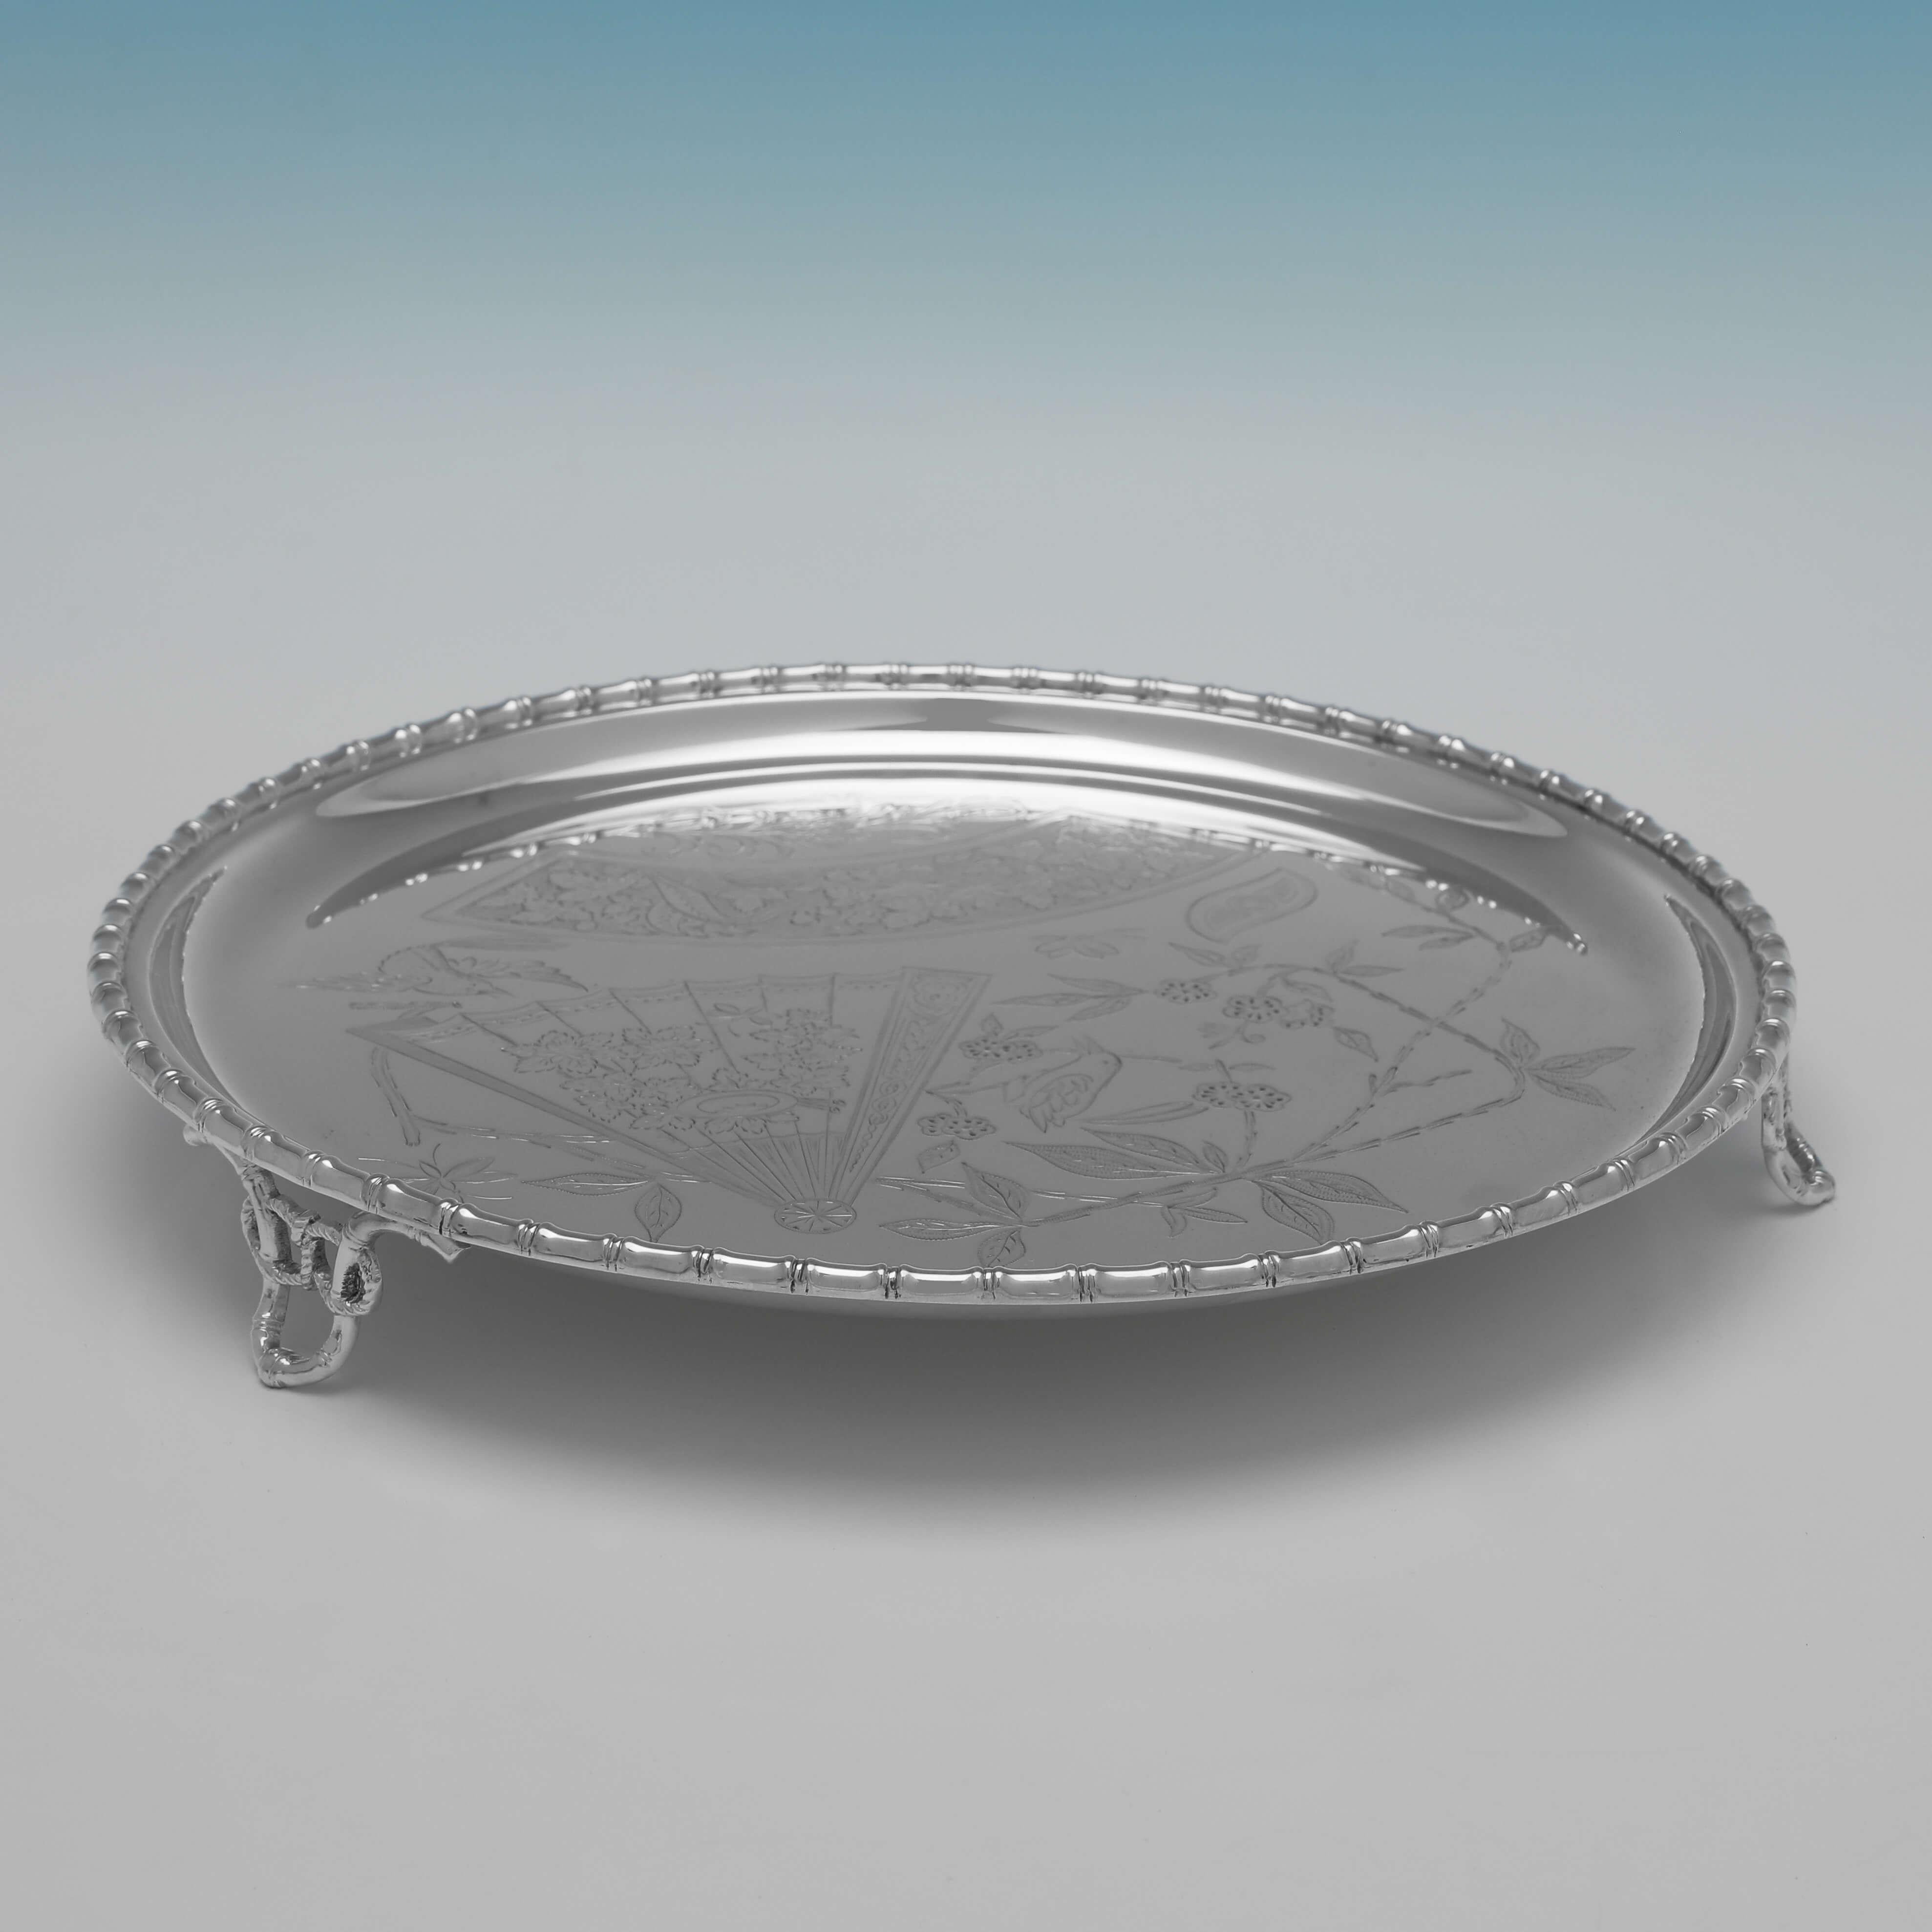 Made circa 1870 by Atkin Brothers, this very attractive, Antique Silver Plate Salver, is a wonderful example of Aesthetic design, featuring a bamboo edge and Japanese inspired engraving to the centre. The salver measures 1.25